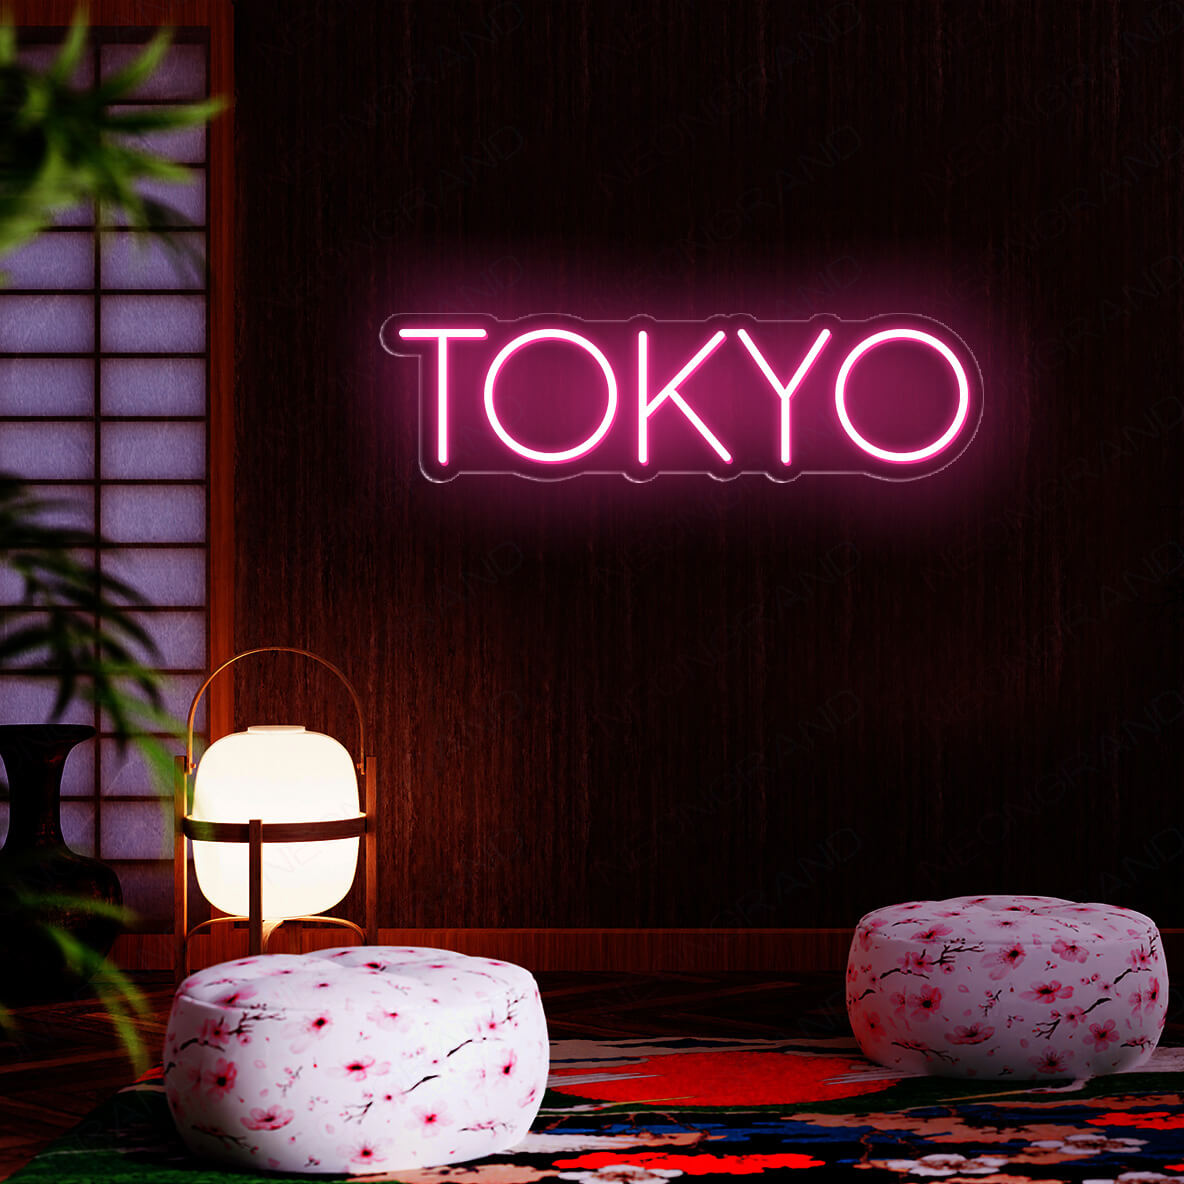 Tokyo Neon Sign Led Light, Japanese Neon Signs 3